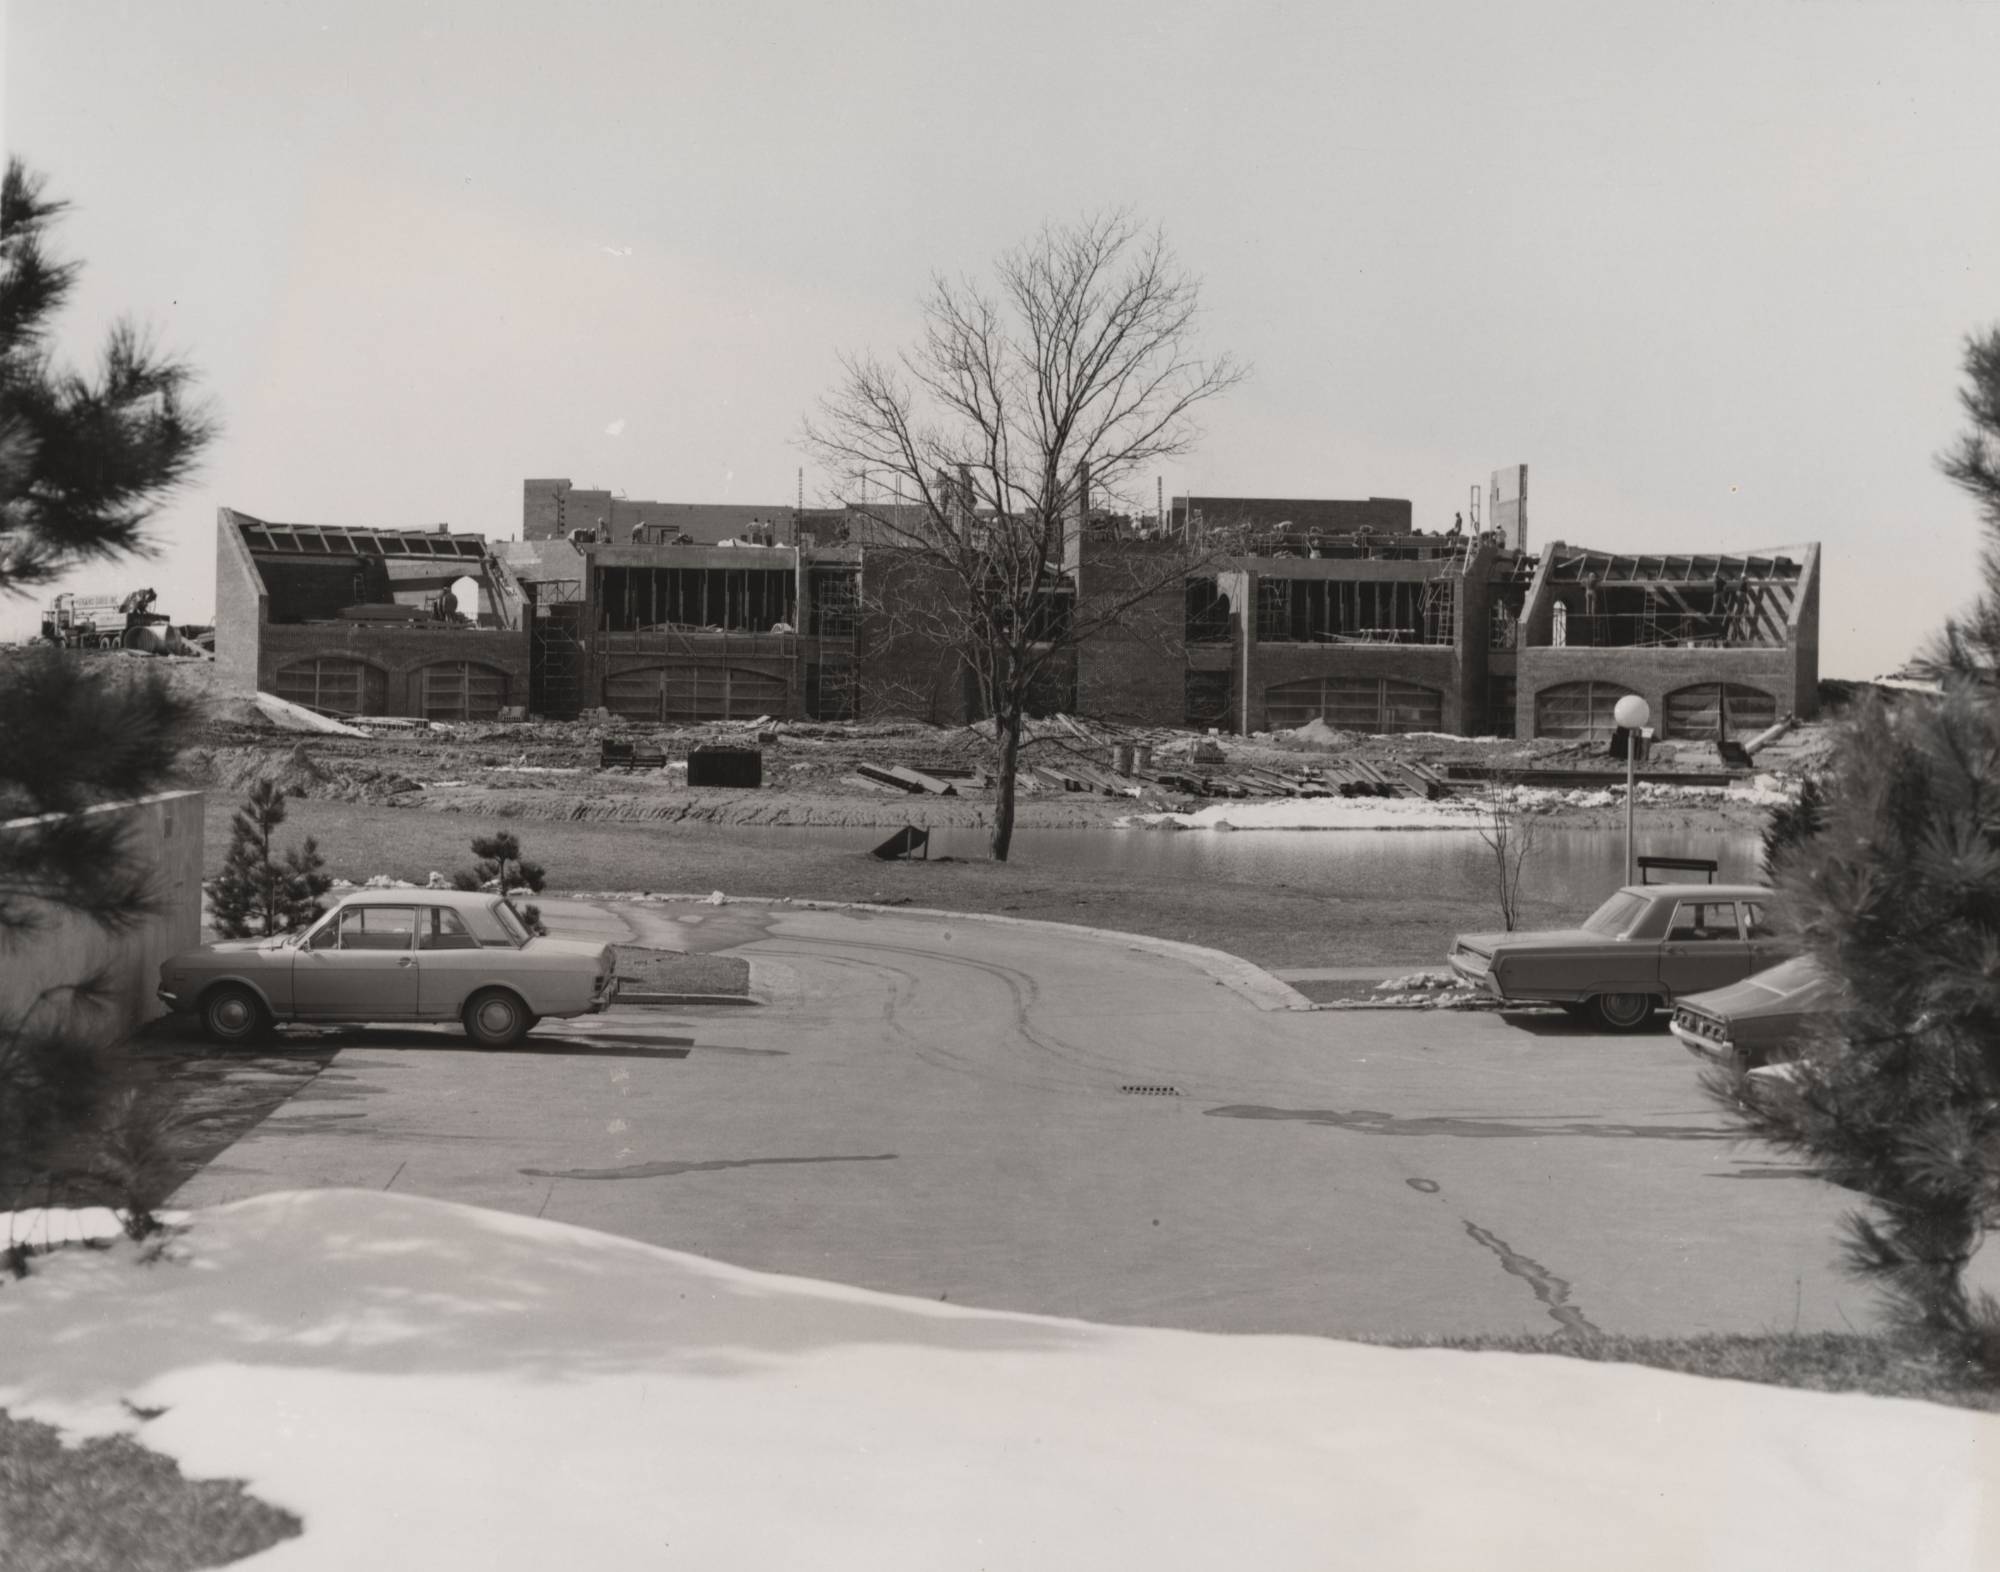 View from Zumberge Library across the pond of Kirkhof Center under construction, ca. 1974.